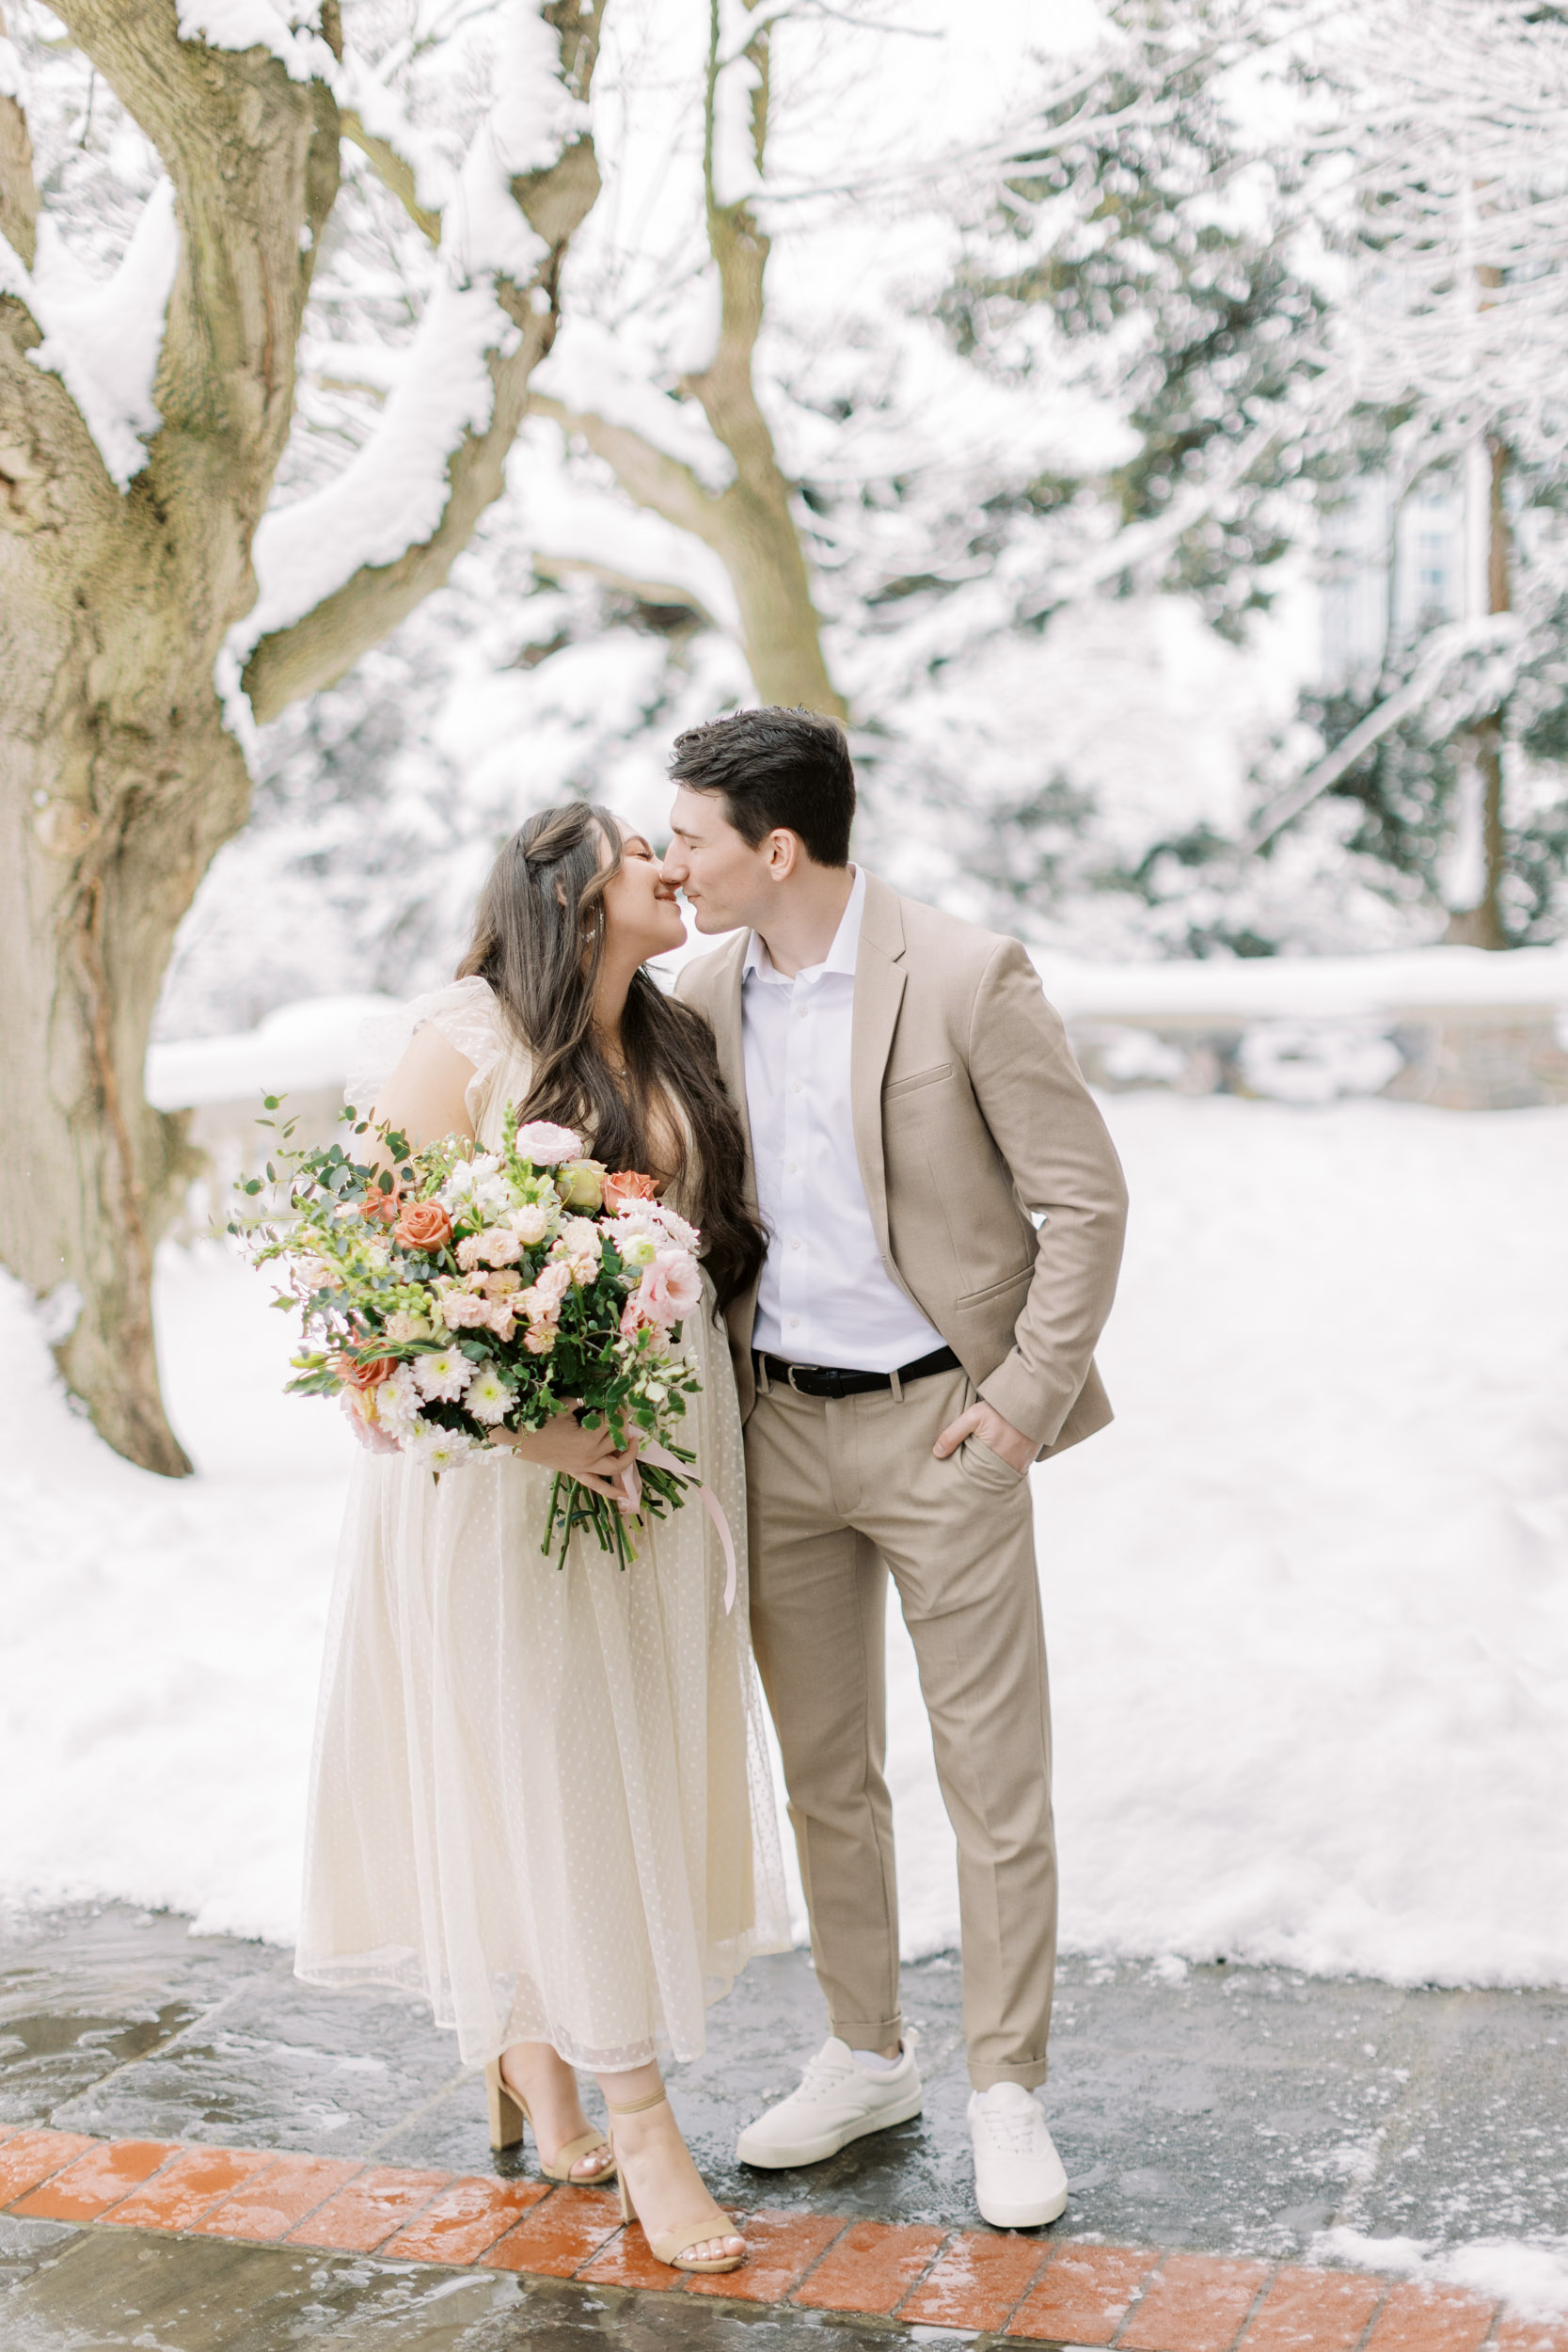 Bride and groom smiling at each other in snowy backyard at Graydon hall